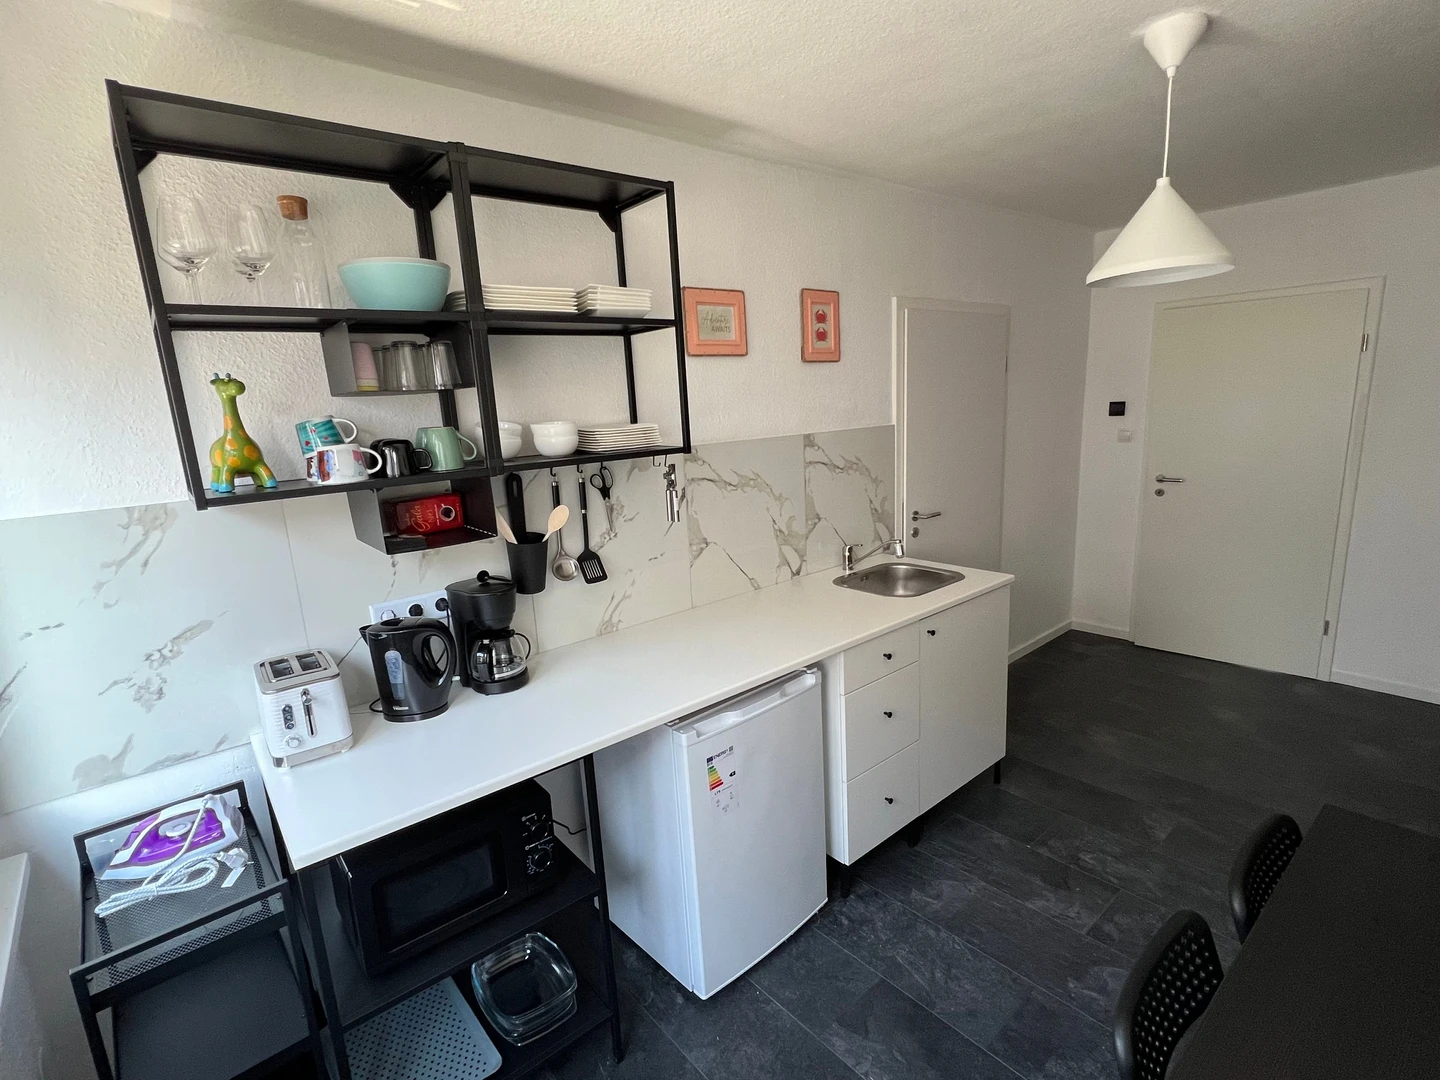 Room for rent with double bed Koblenz